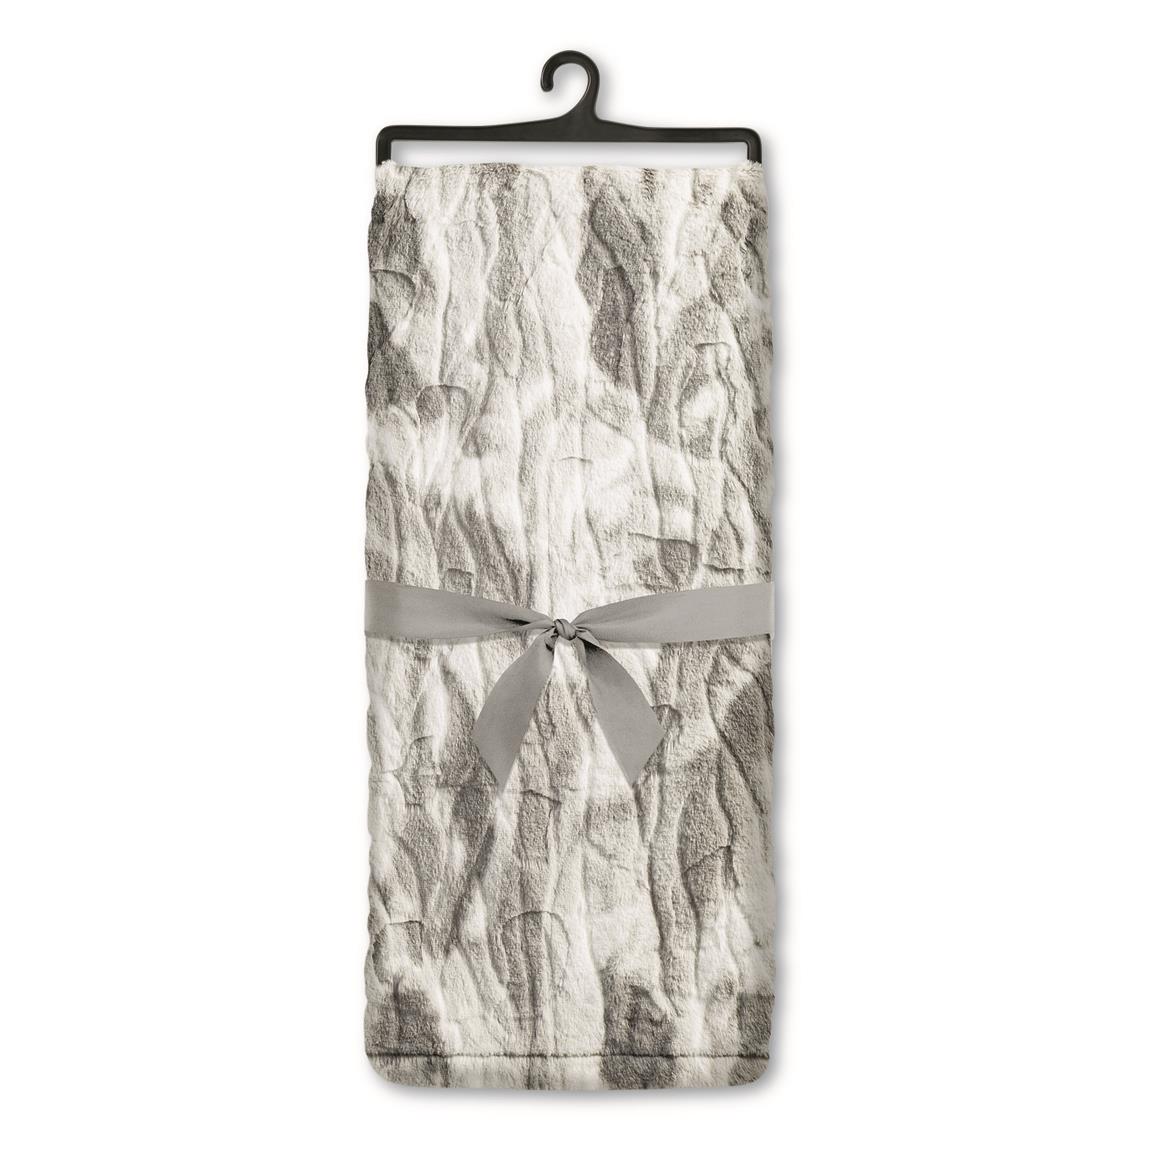 Safdie & Co. Textured Arctic Faux Fur Throw Blanket, Tundra